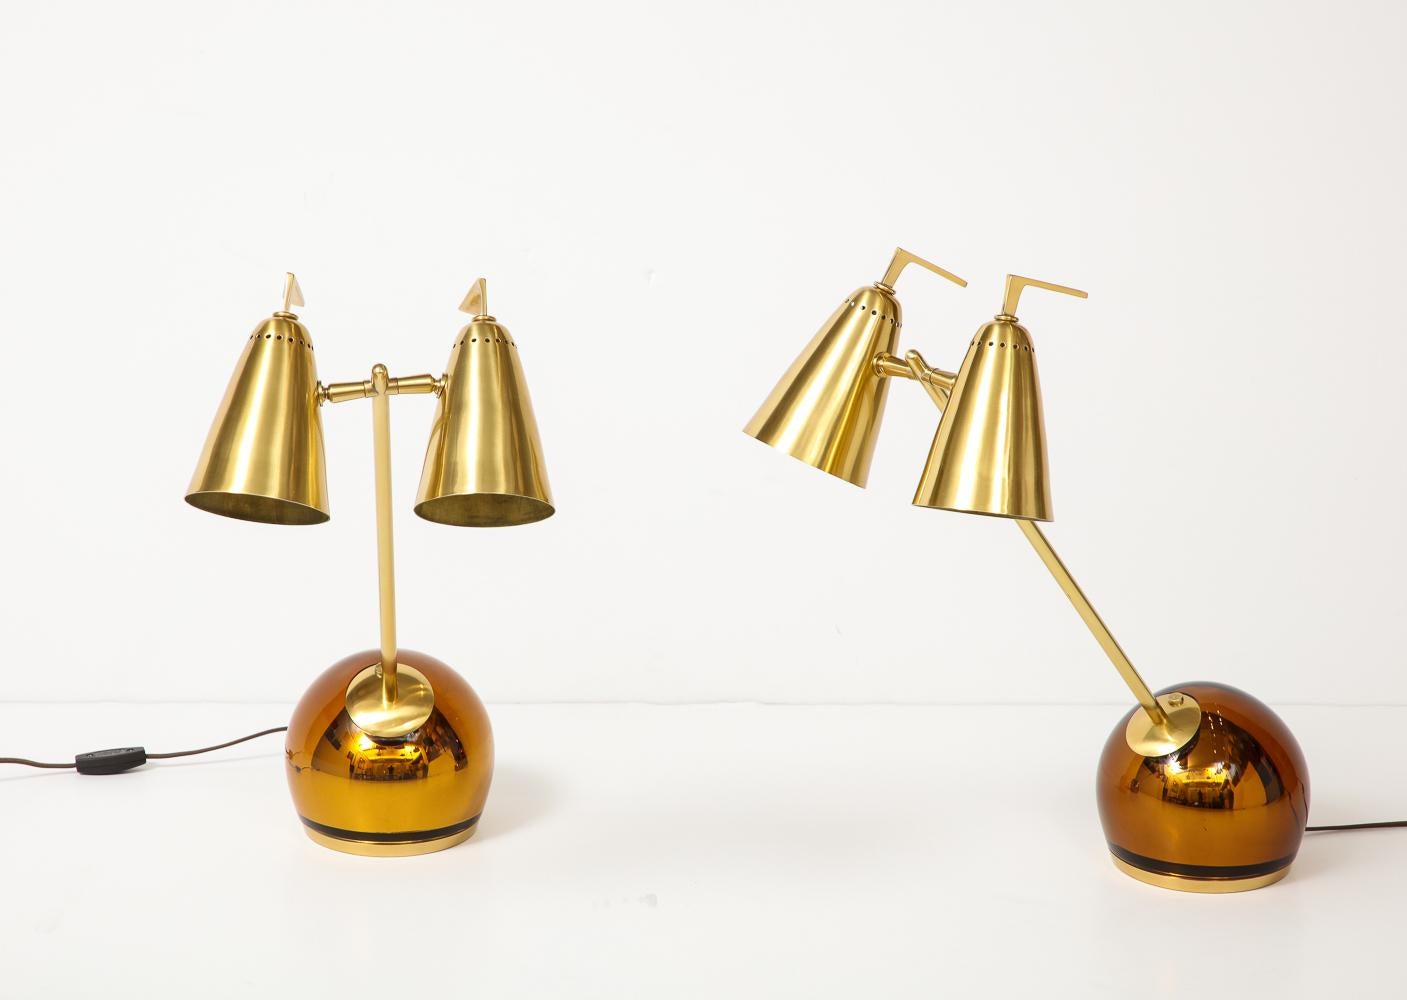 Glass and polished brass. Seguso glass bases with adjustable brass shades.  This lamp has been rewired with 2 new E12 candelabra sockets added.  We currently have only 1 lamp available.  Price shown is for 1 lamp.